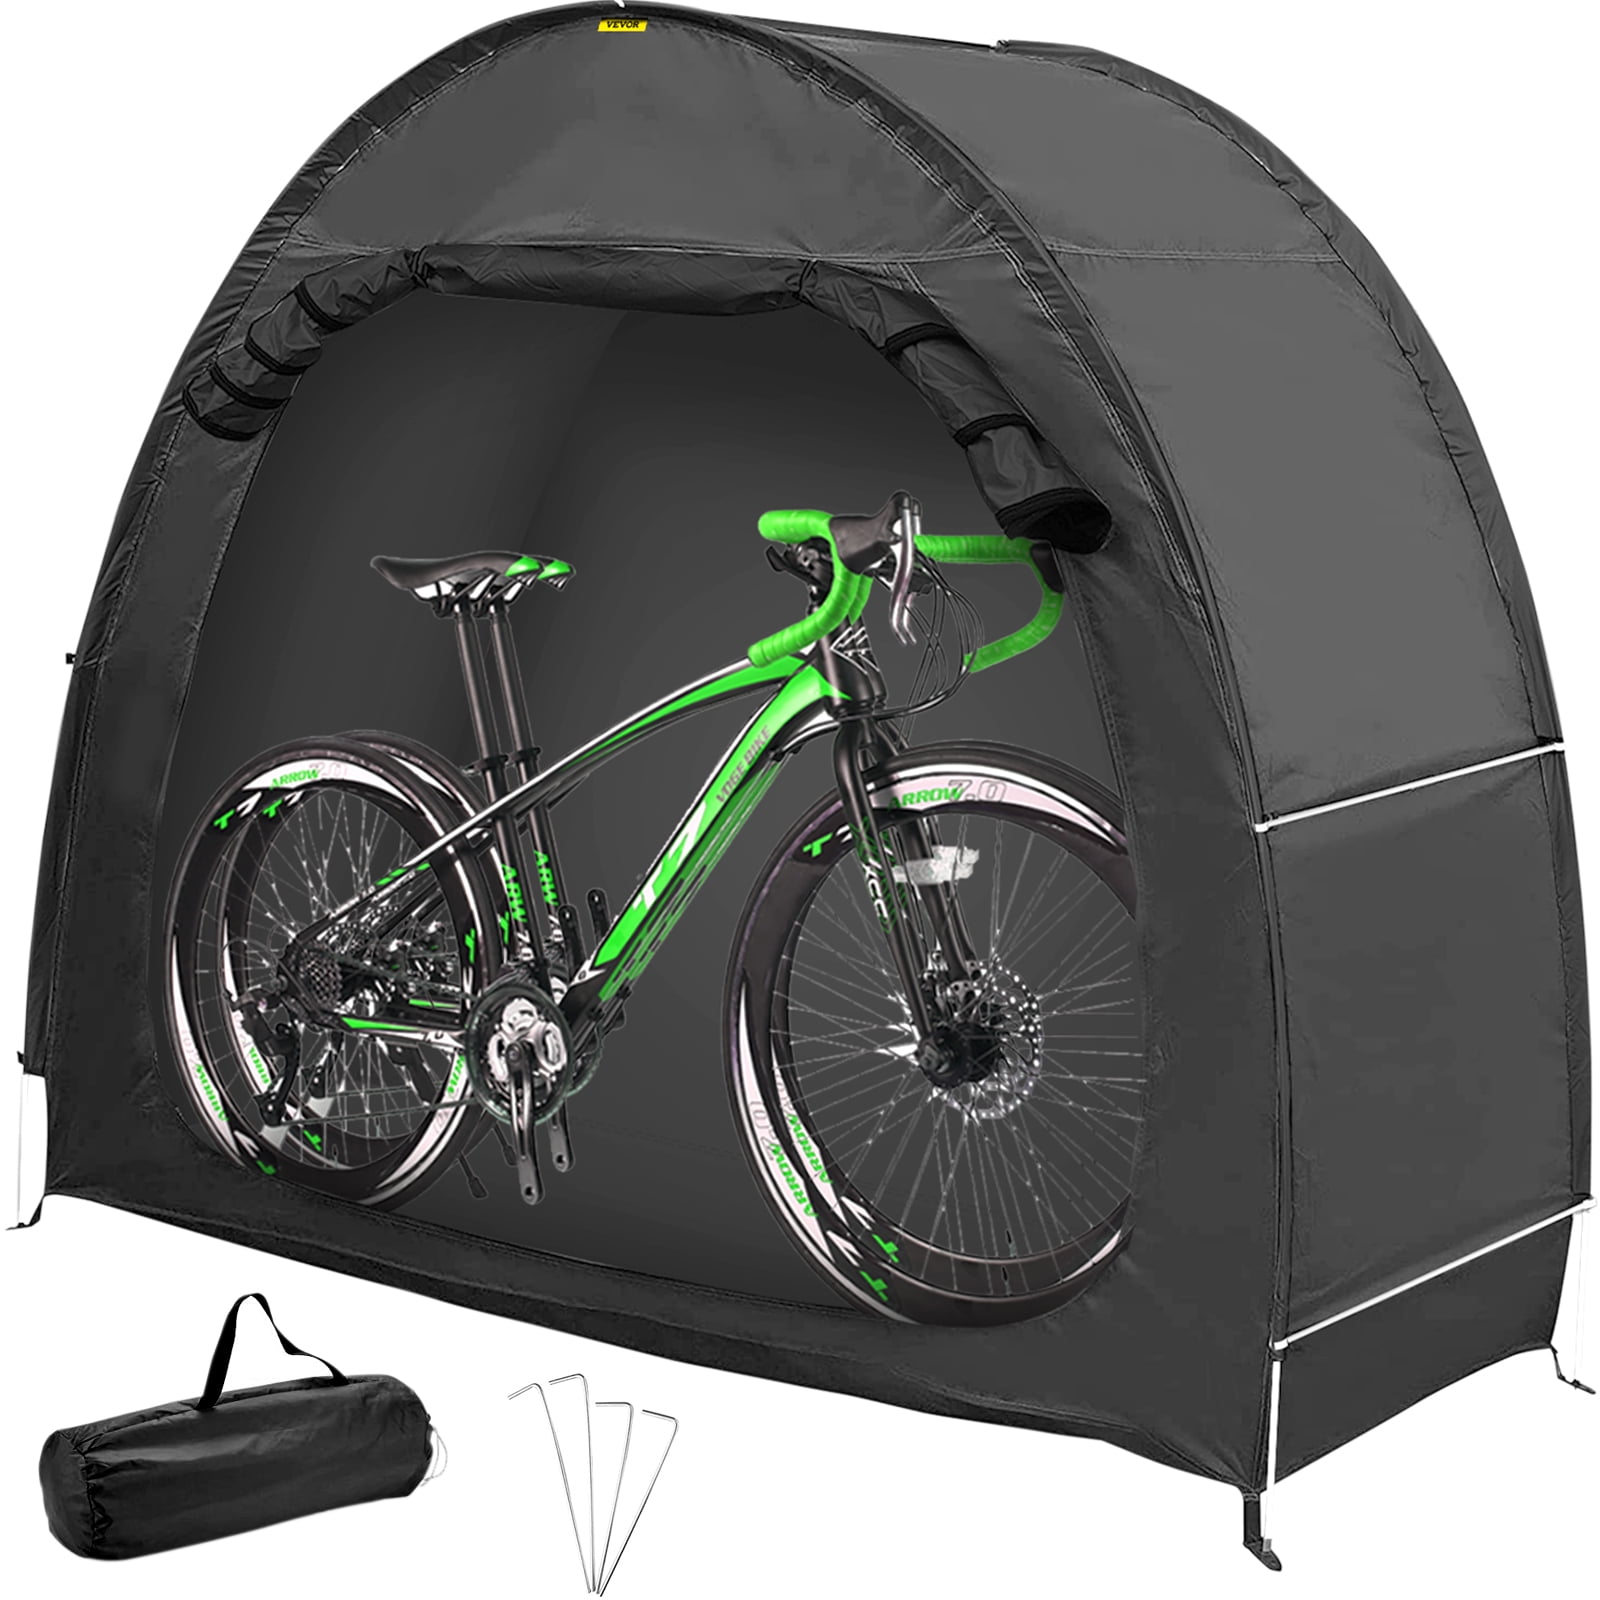 can Store Three Bicycles Windproof MAIZOA Outdoor Storage Bicycle Cover Outdoor Portable Bicycle Tent Waterproof and Sunscreen 